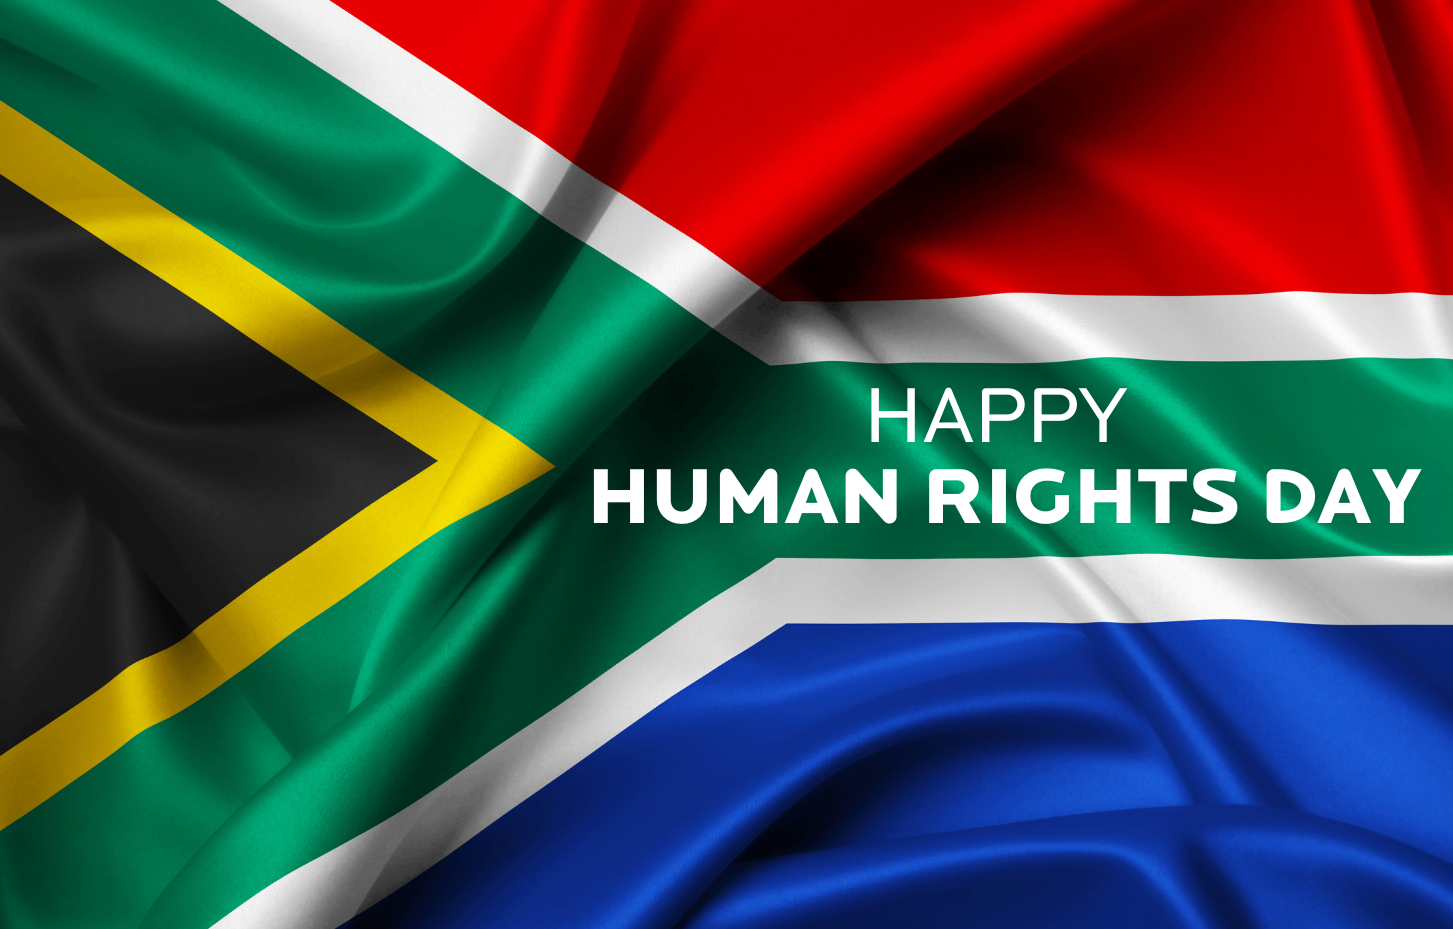  Human Rights Day